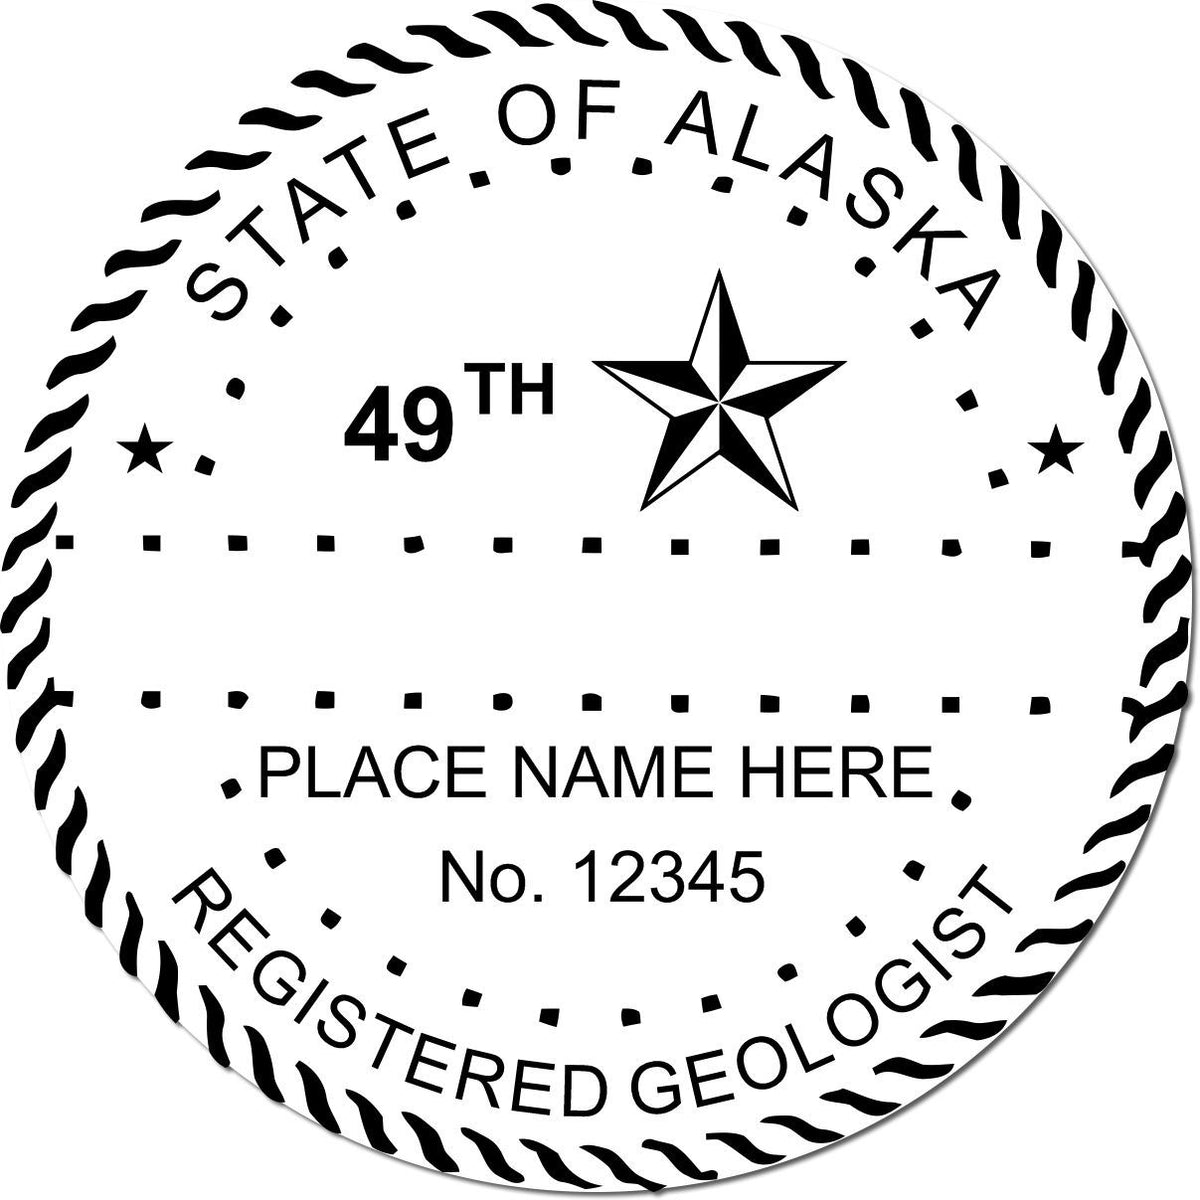 This paper is stamped with a sample imprint of the Alaska Professional Geologist Seal Stamp, signifying its quality and reliability.